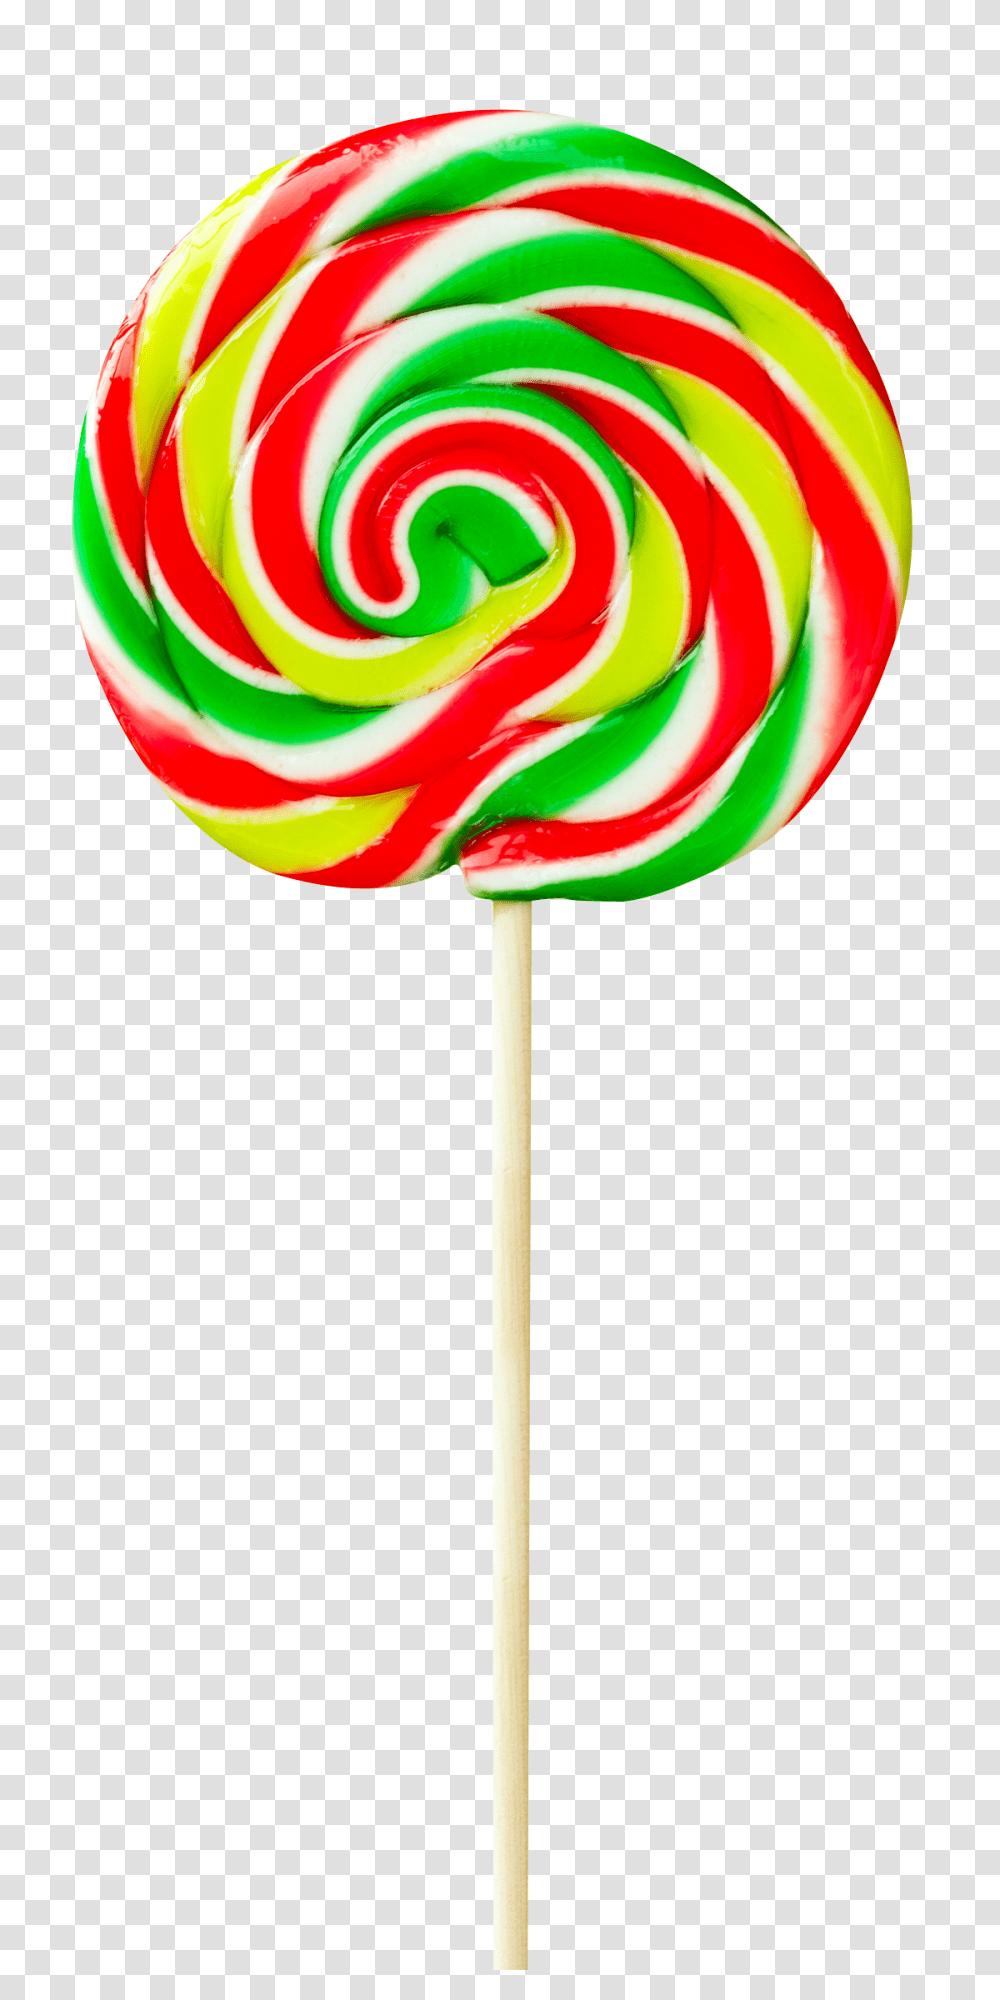 Lollipop Image, Food, Balloon, Candy, Sweets Transparent Png